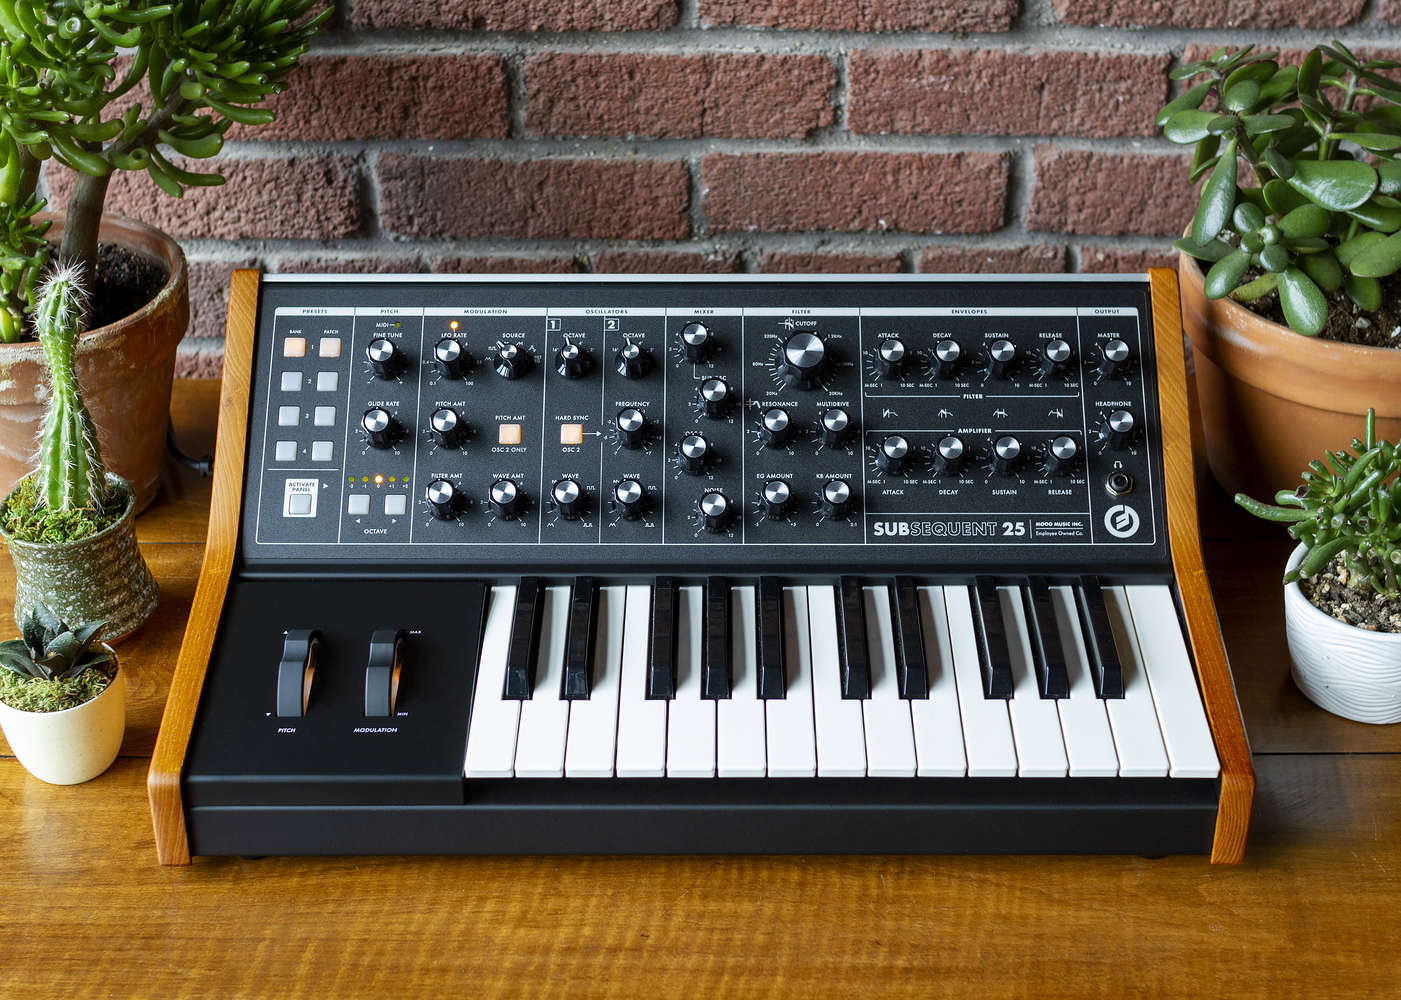 Moog Subsequent 25 - SynthÉtiseur - Variation 2